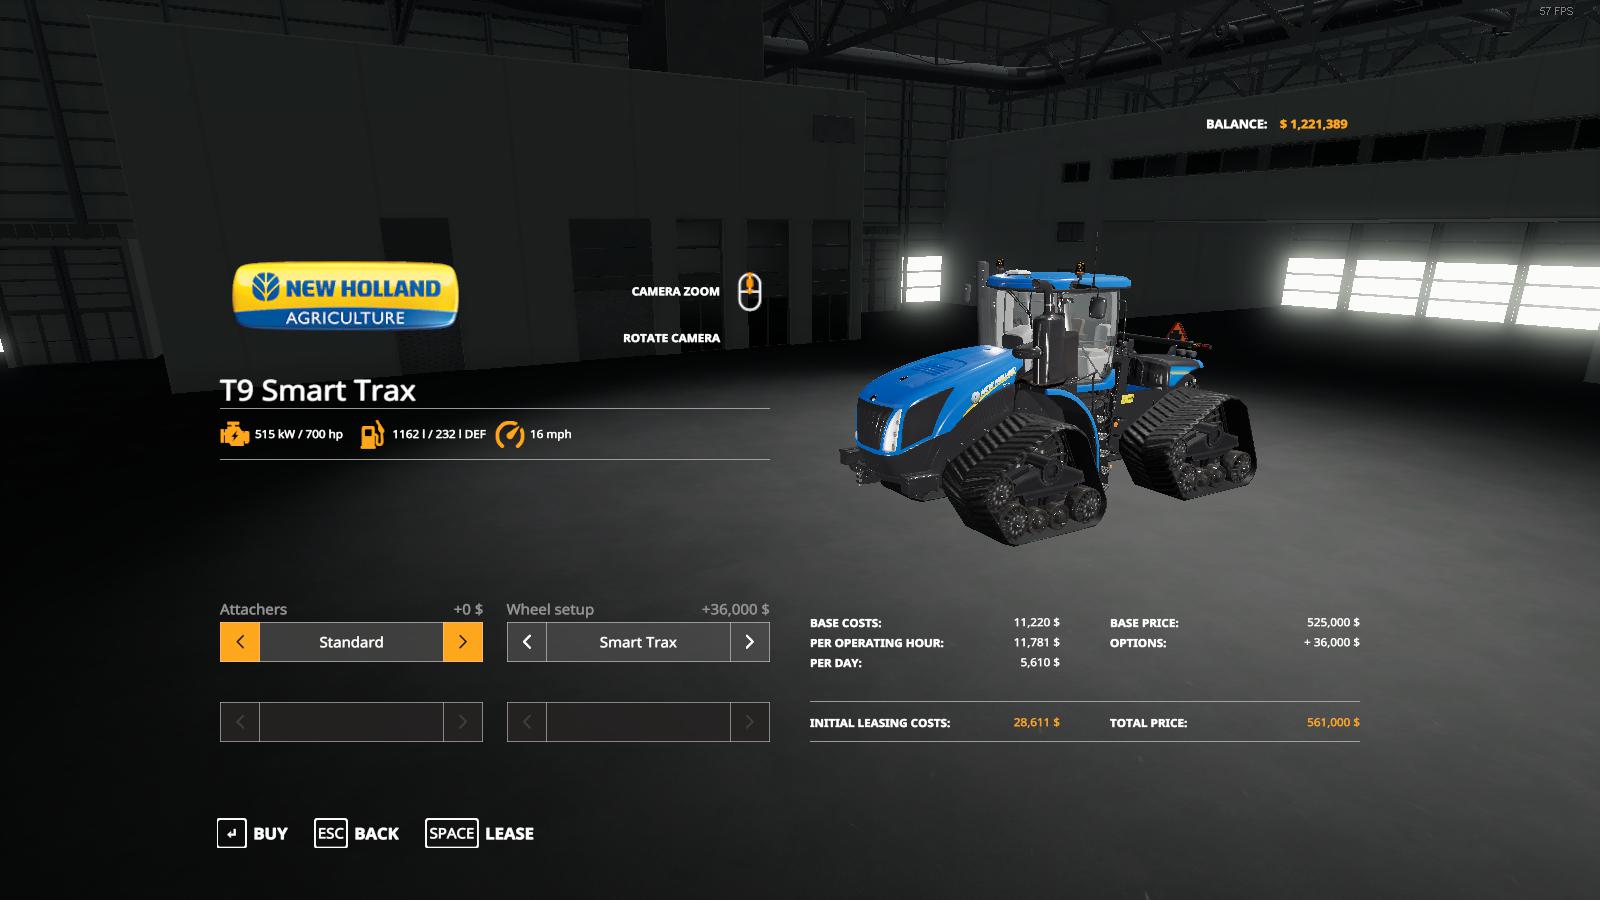 Ошибки new holland. New Holland t9 700. Трактор Нью Холланд т 9 700. Fs19_New_Holland_t9 by styv. New Holland t7 Series fs19.